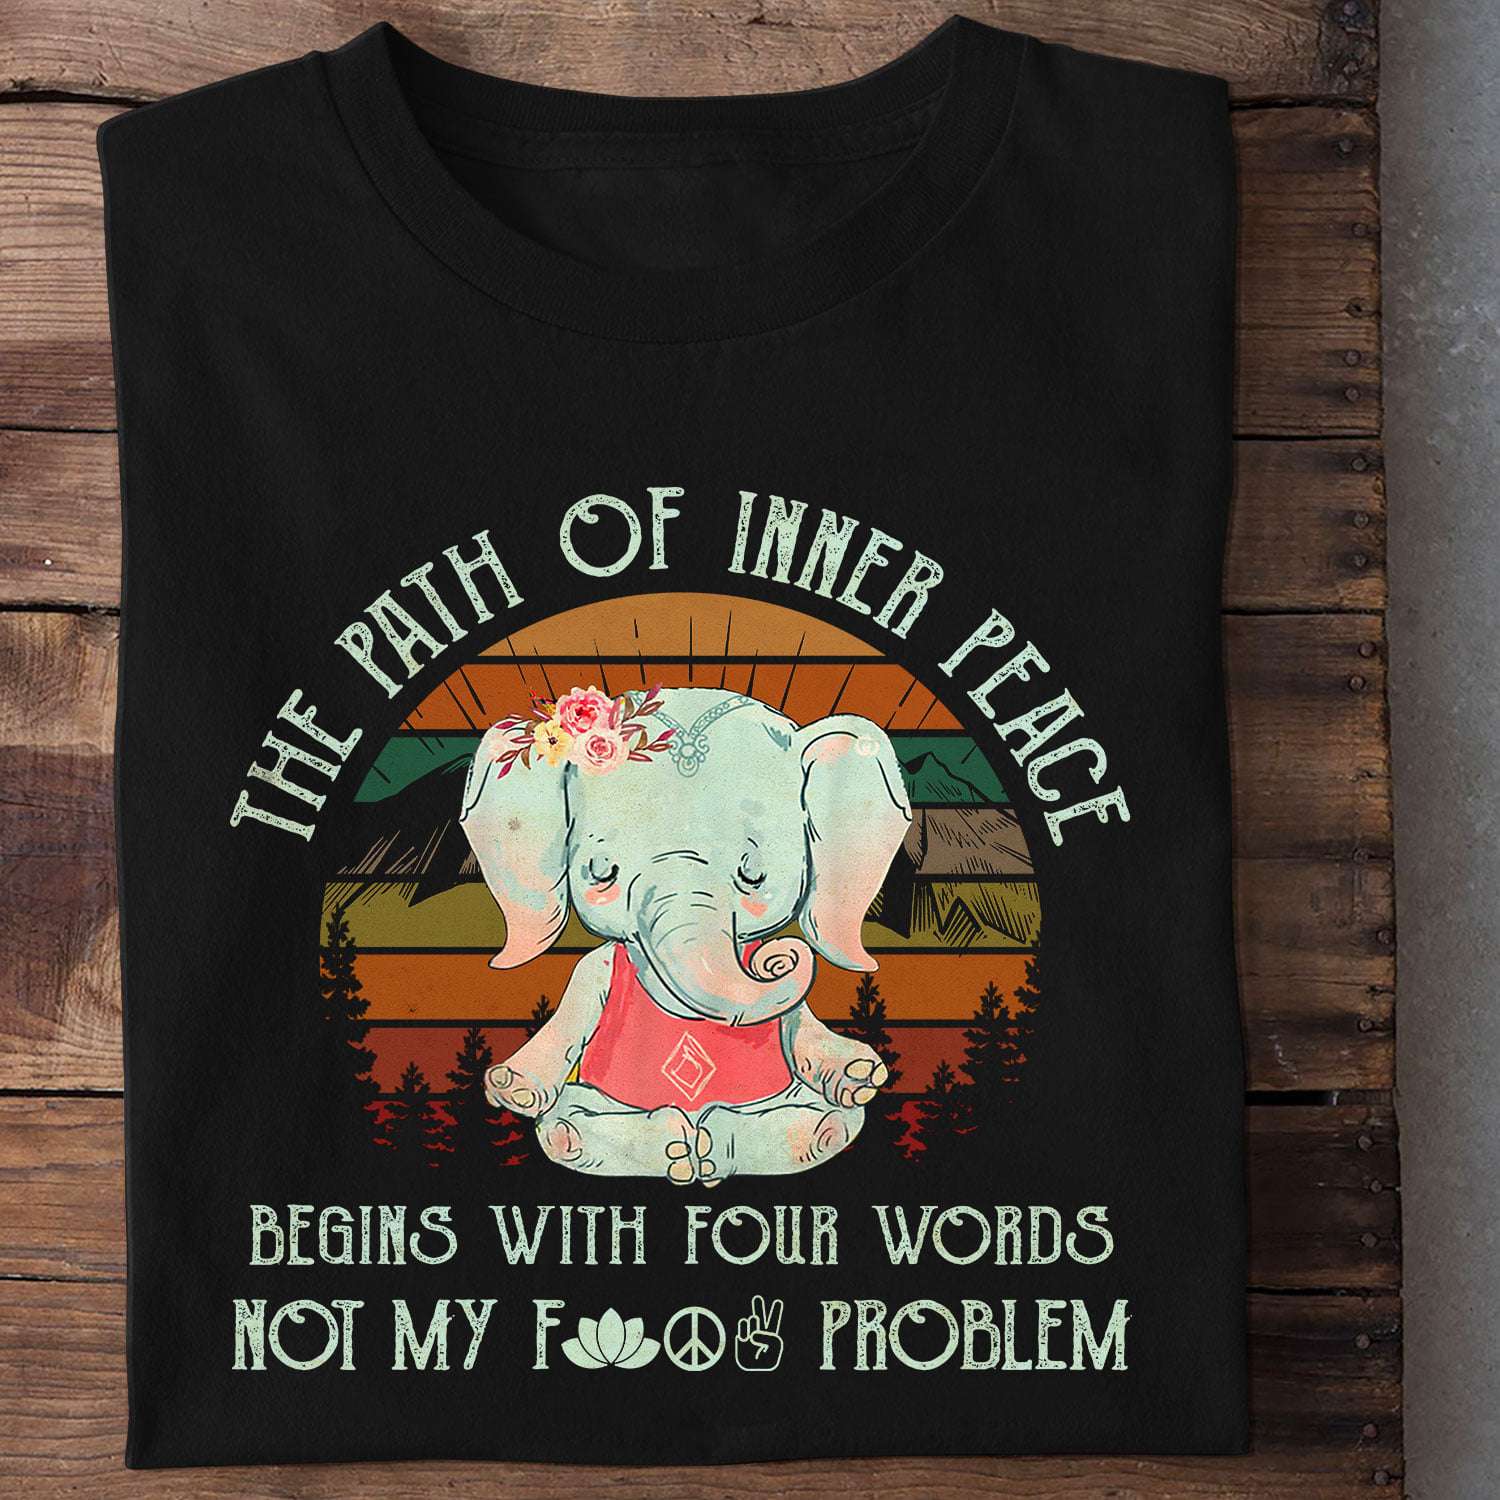 The path of inner peace, begins with four words, not fucking problem - Elephant doing yoga